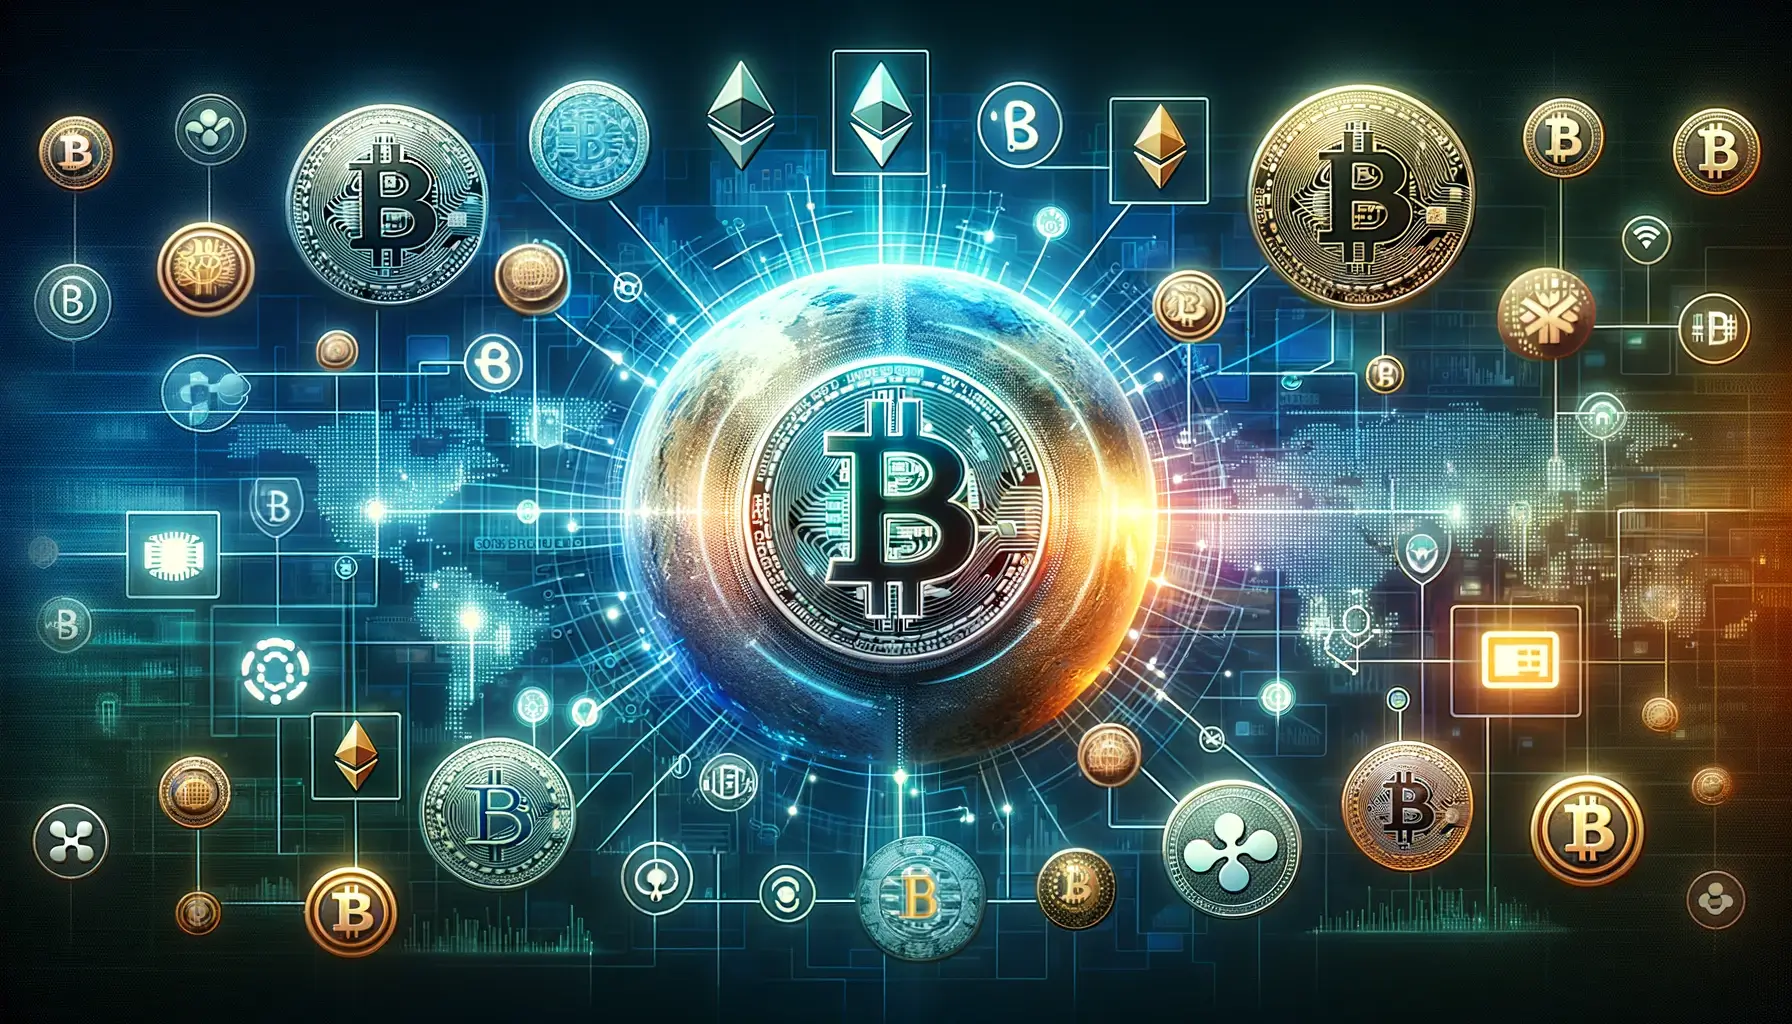 Digital collage of cryptocurrency icons including Bitcoin, Ethereum, and Ripple against a futuristic financial background.